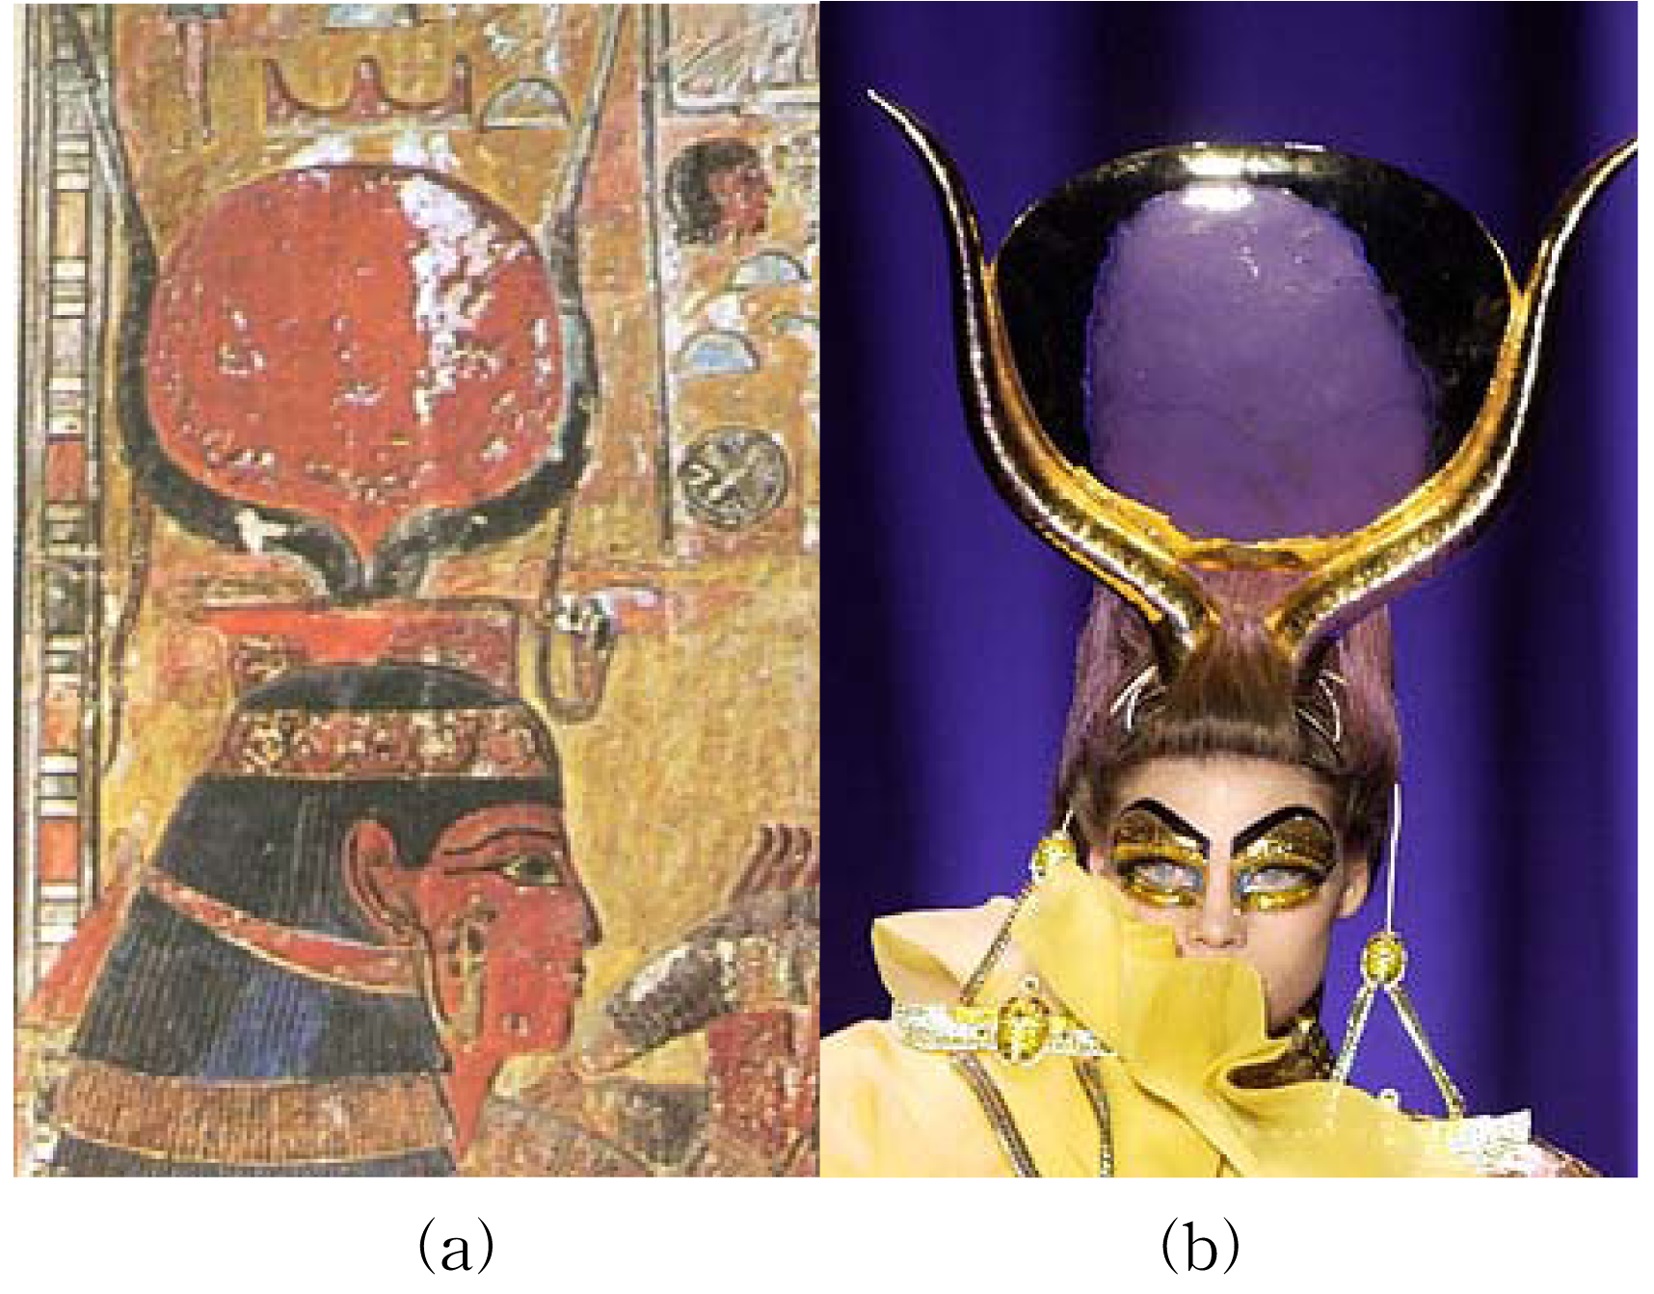 (a) Hathor's Hat, 20,000. years of fashion, p.98, (b) Christian Dior 2004 S/S. www.style.com.